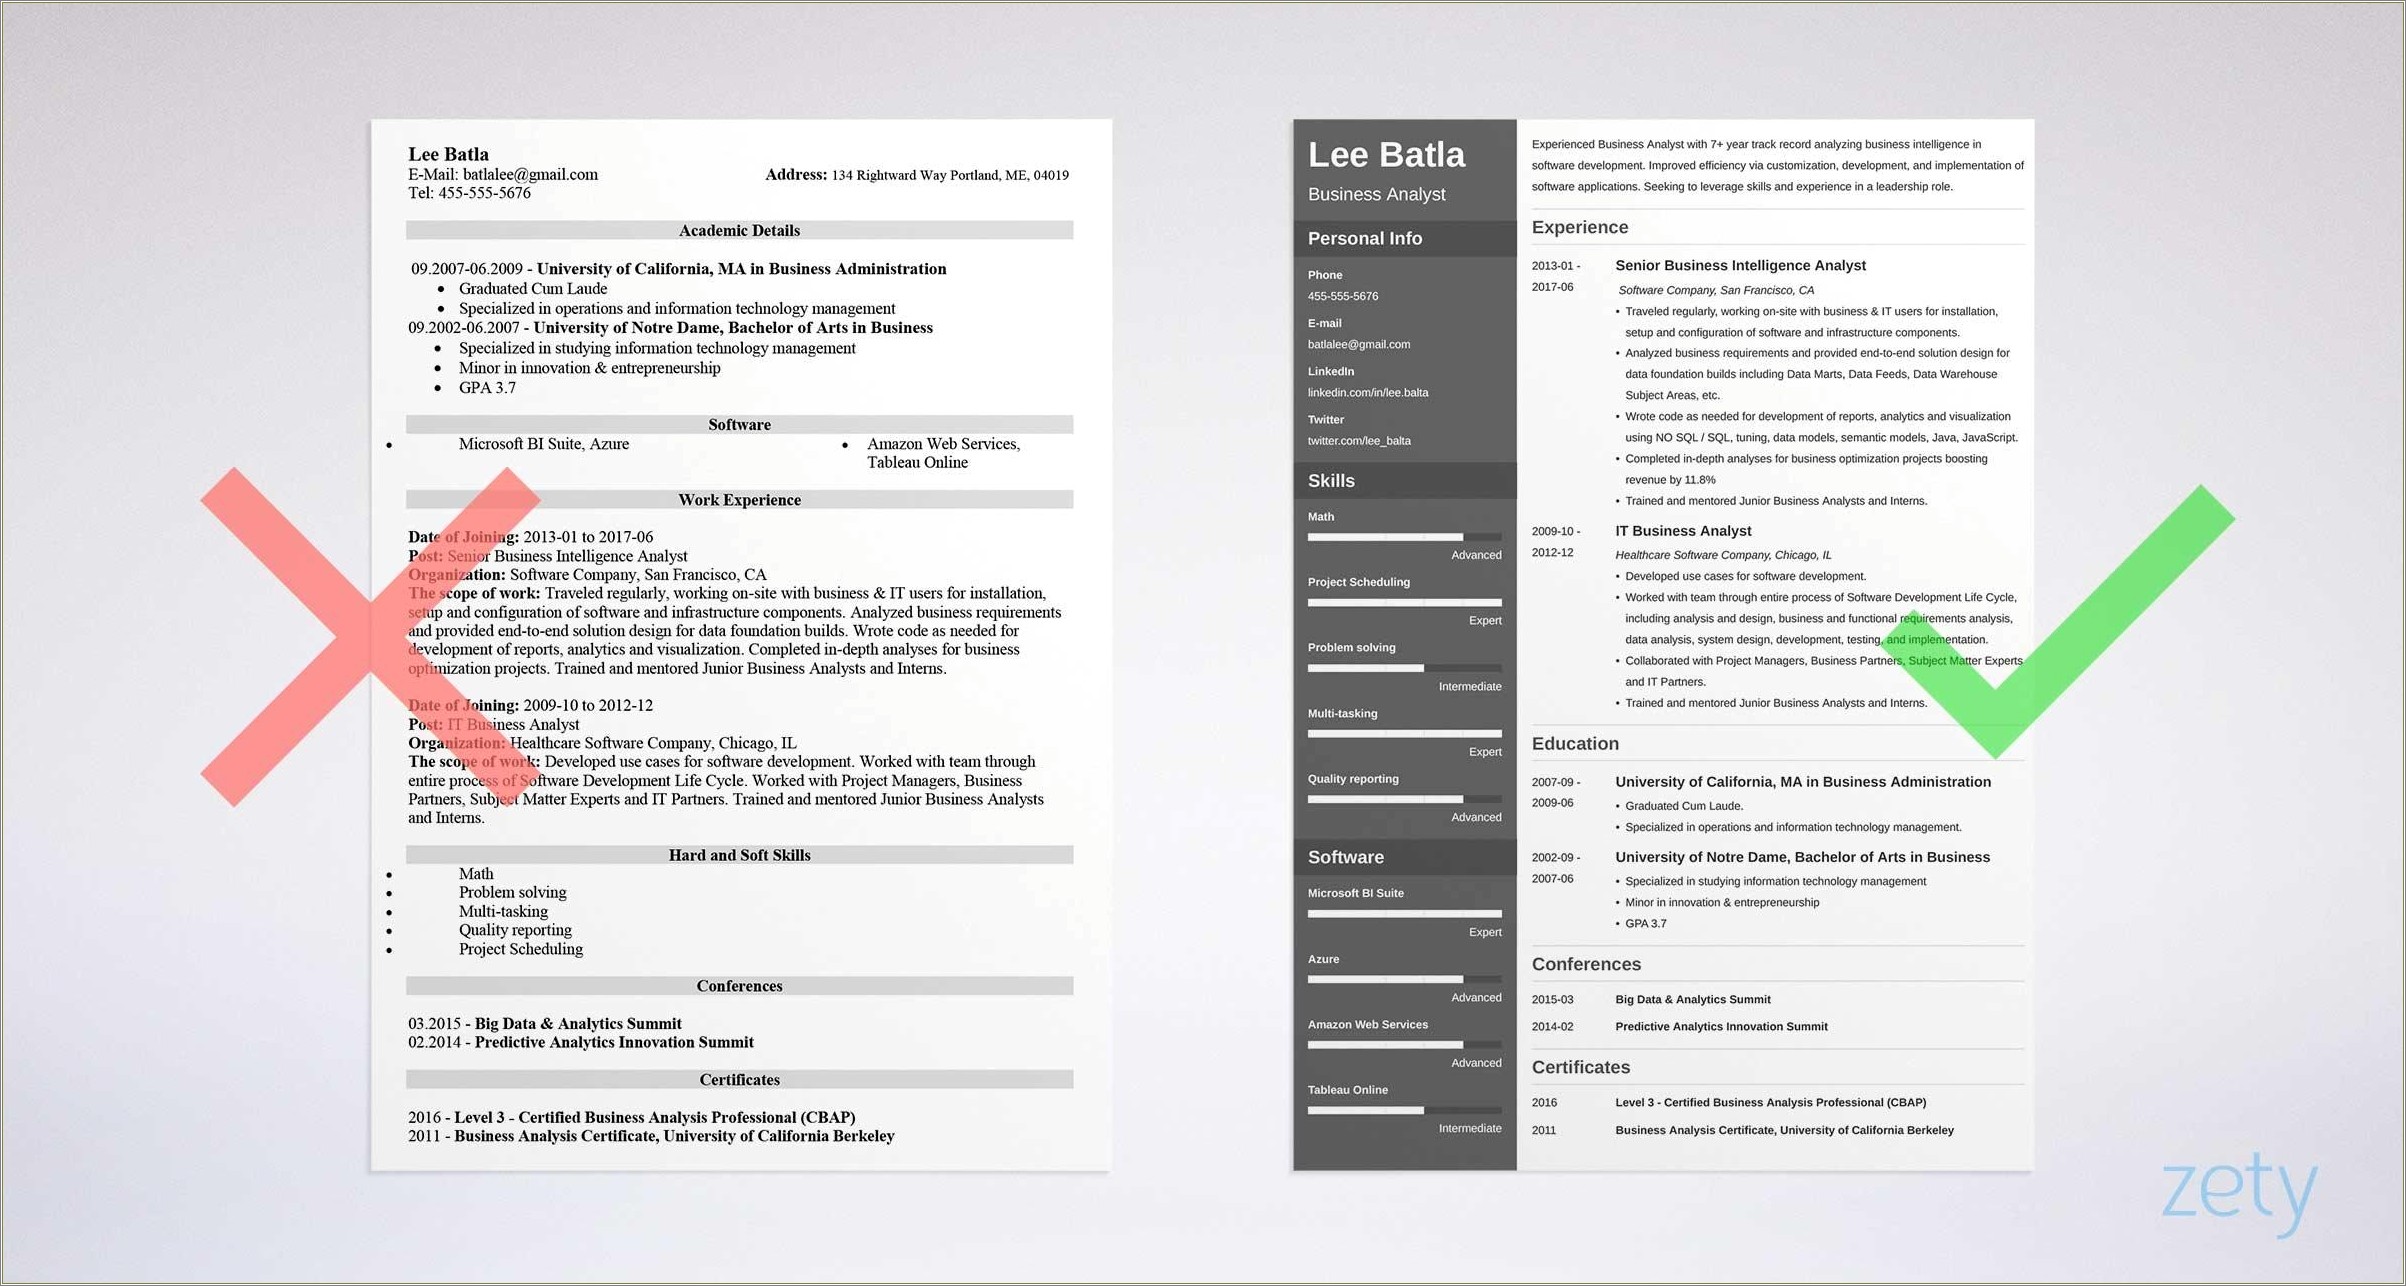 Dba Experience Resume For Business Analsyt